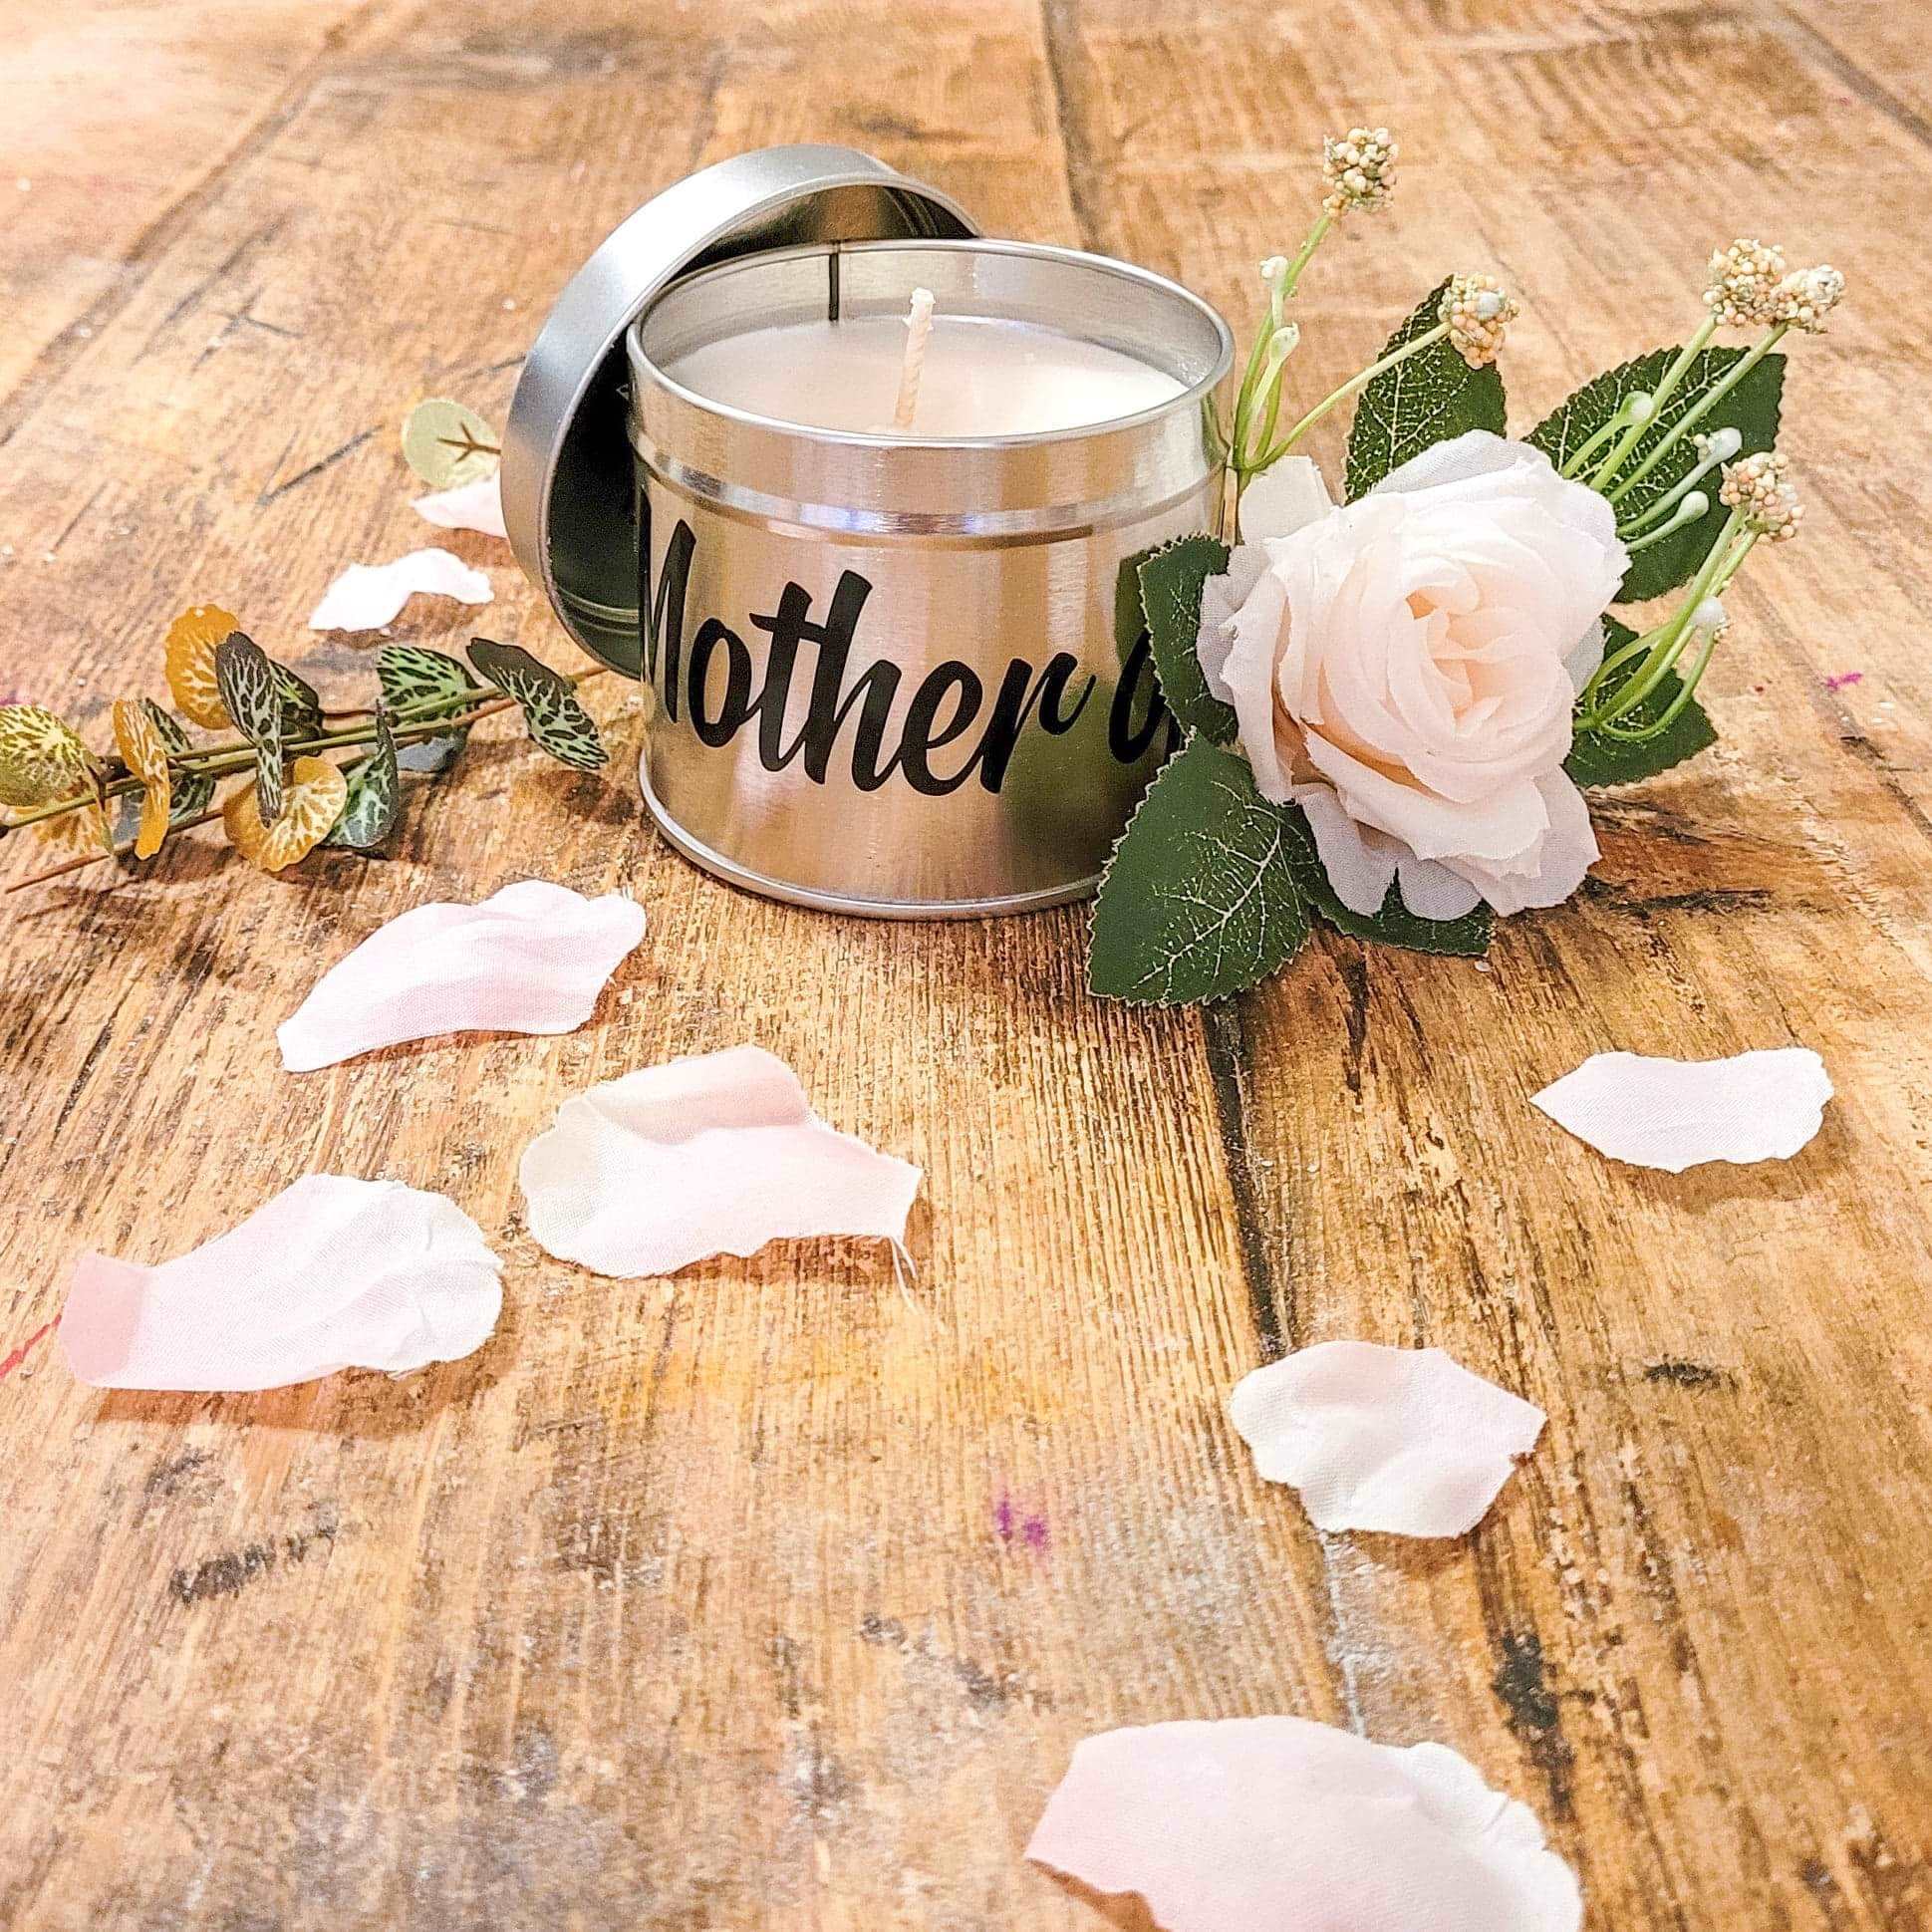 Personalised Scented Wedding Candles - The Cornish Scent Company